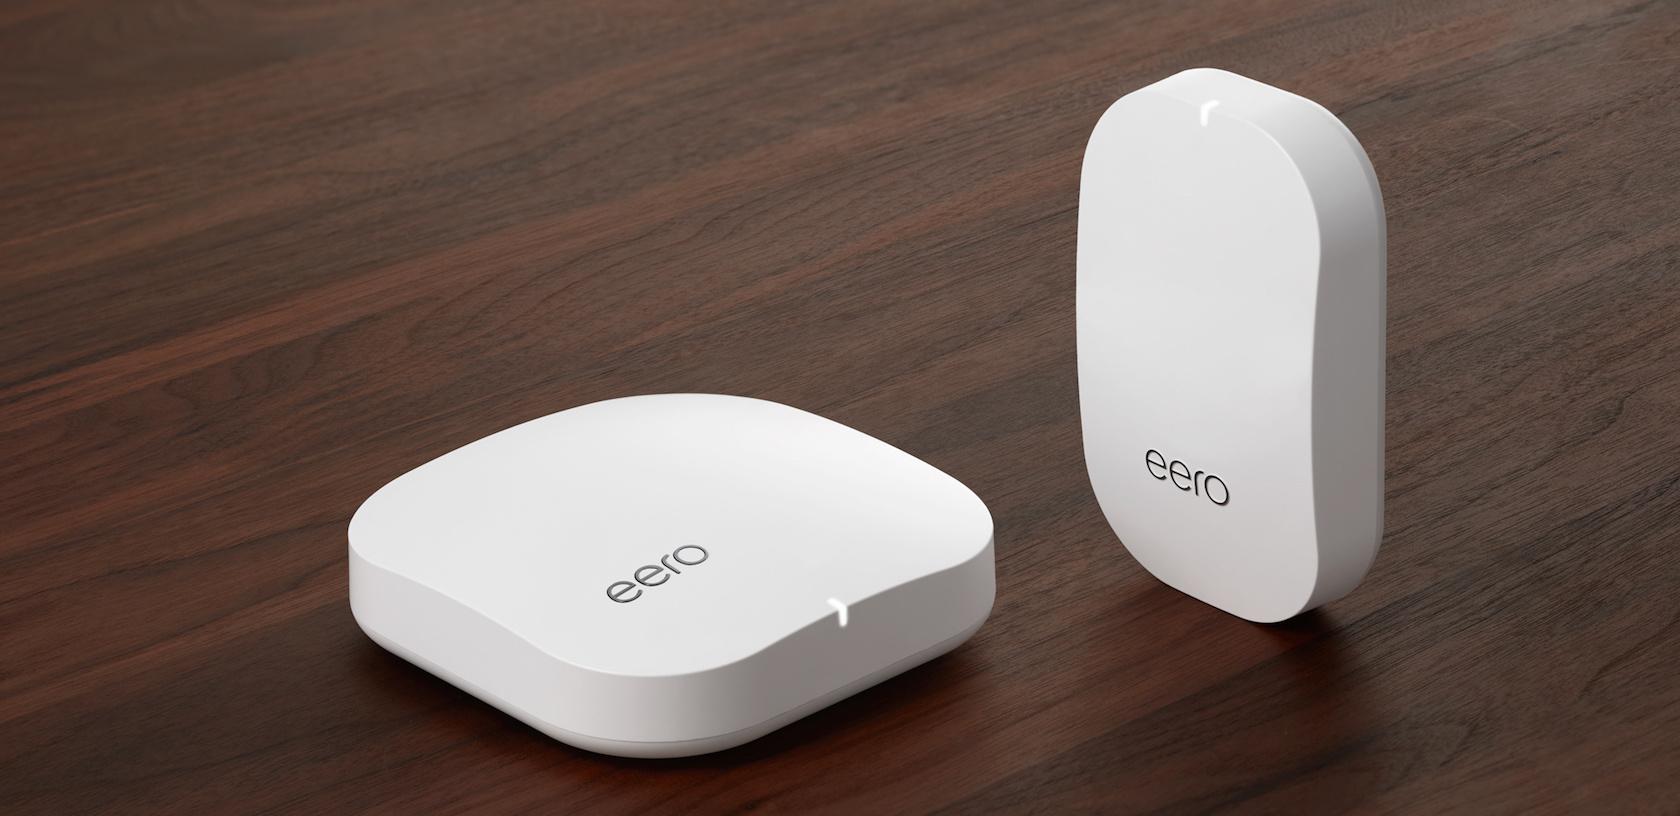 difference between eero router and beacon